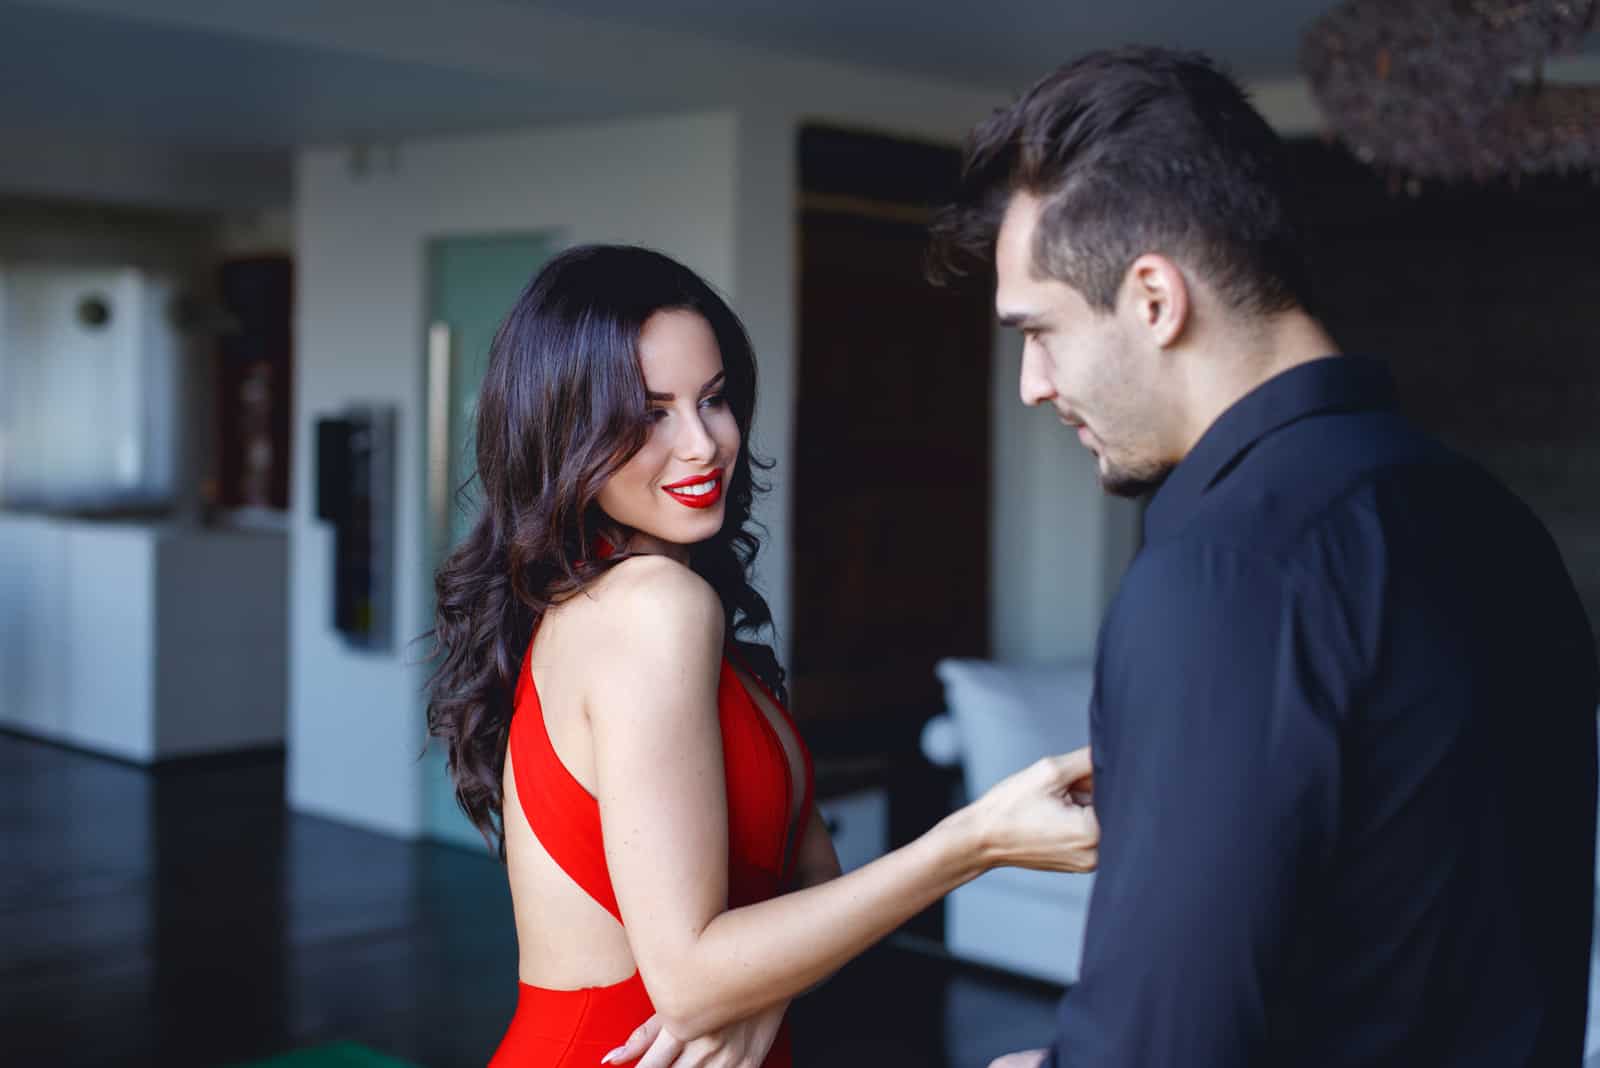 sexy brunette in red dress flirts with man